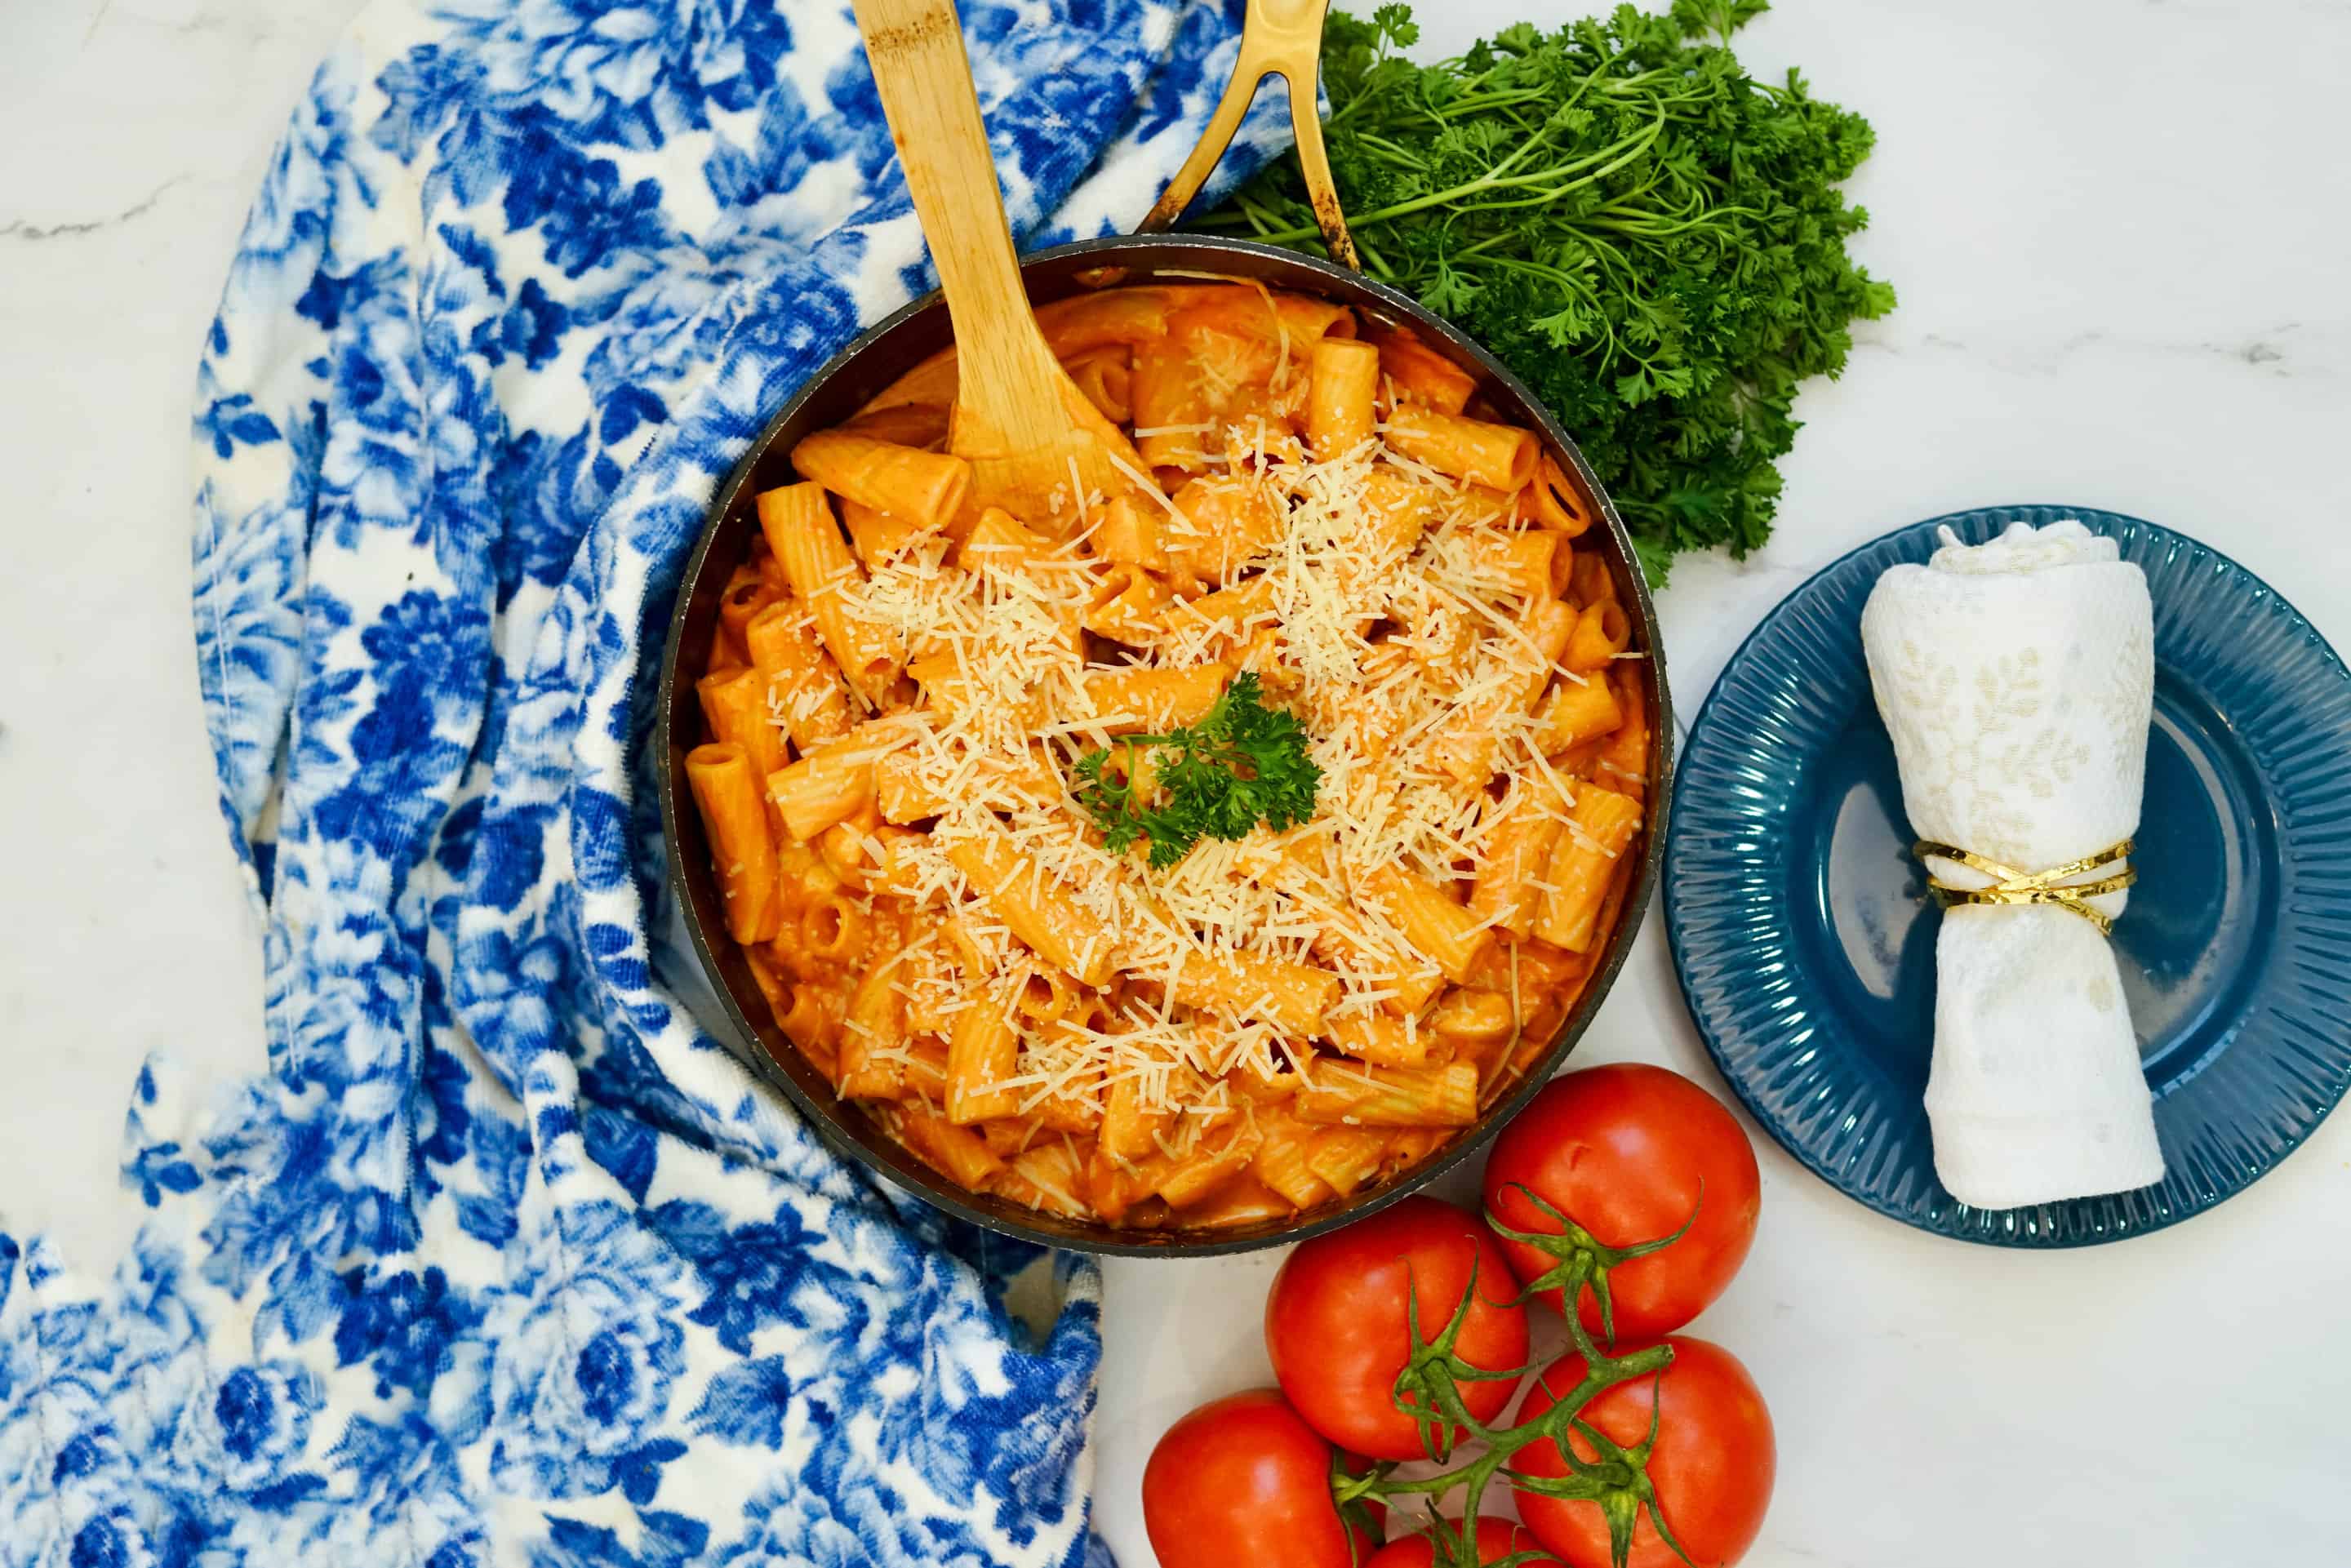 This easy pasta alla vodka recipe can be made with noodles, rigatoni or penne. The creamy vodka pasta sauce is simply delicious!